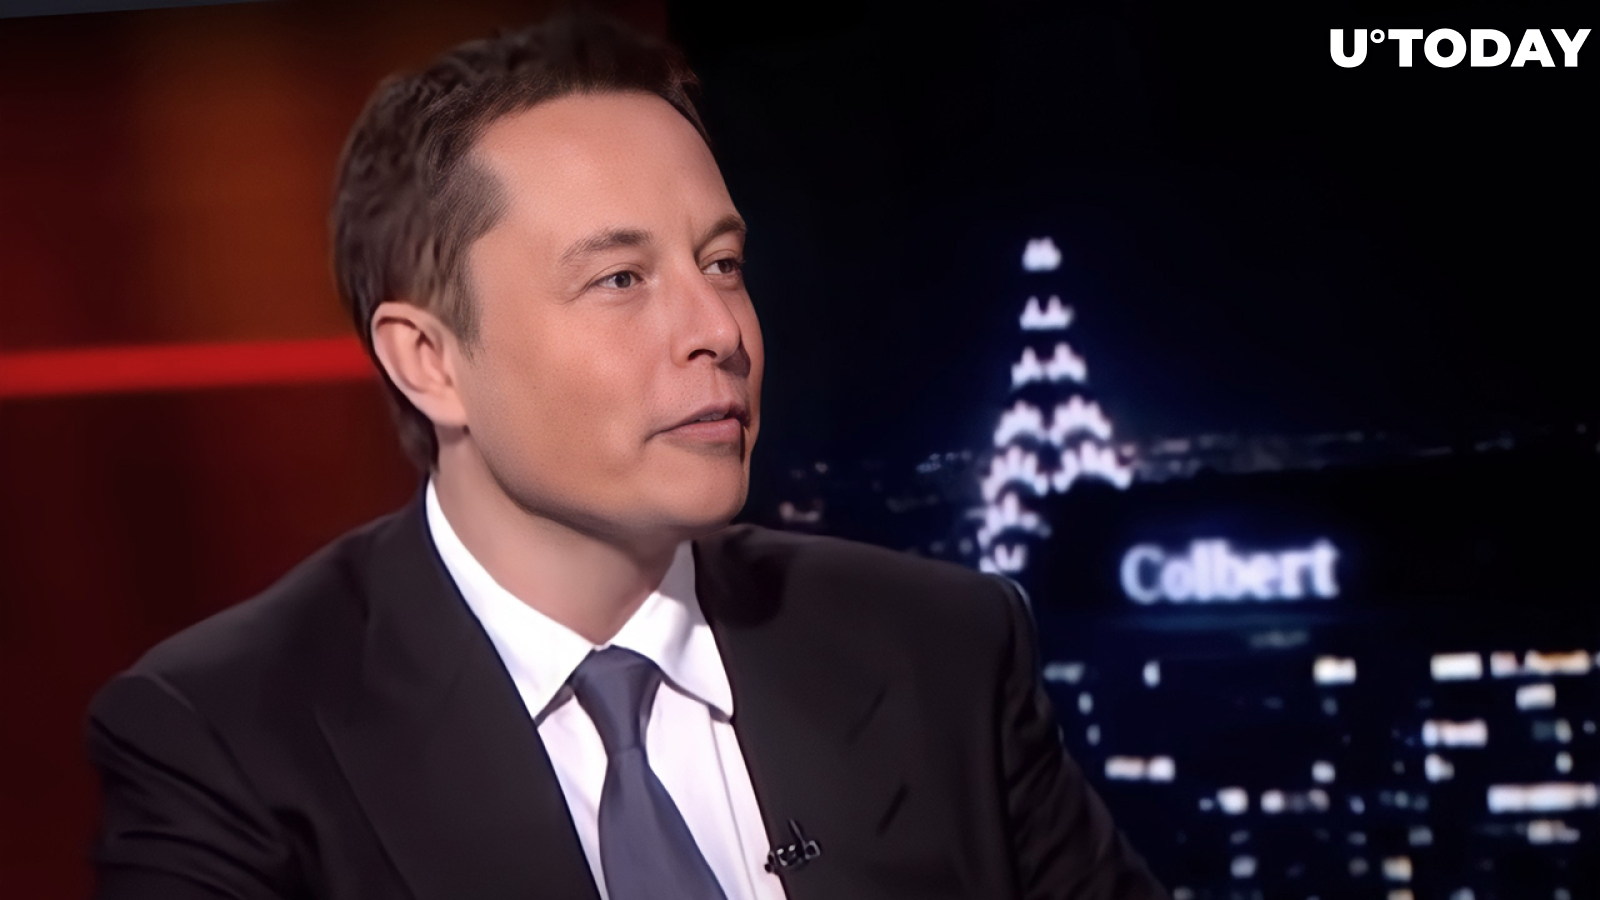 Elon Musk: "I Never Said That People Should Invest in Crypto" After Bitcoin Plunged 70% Since ATH